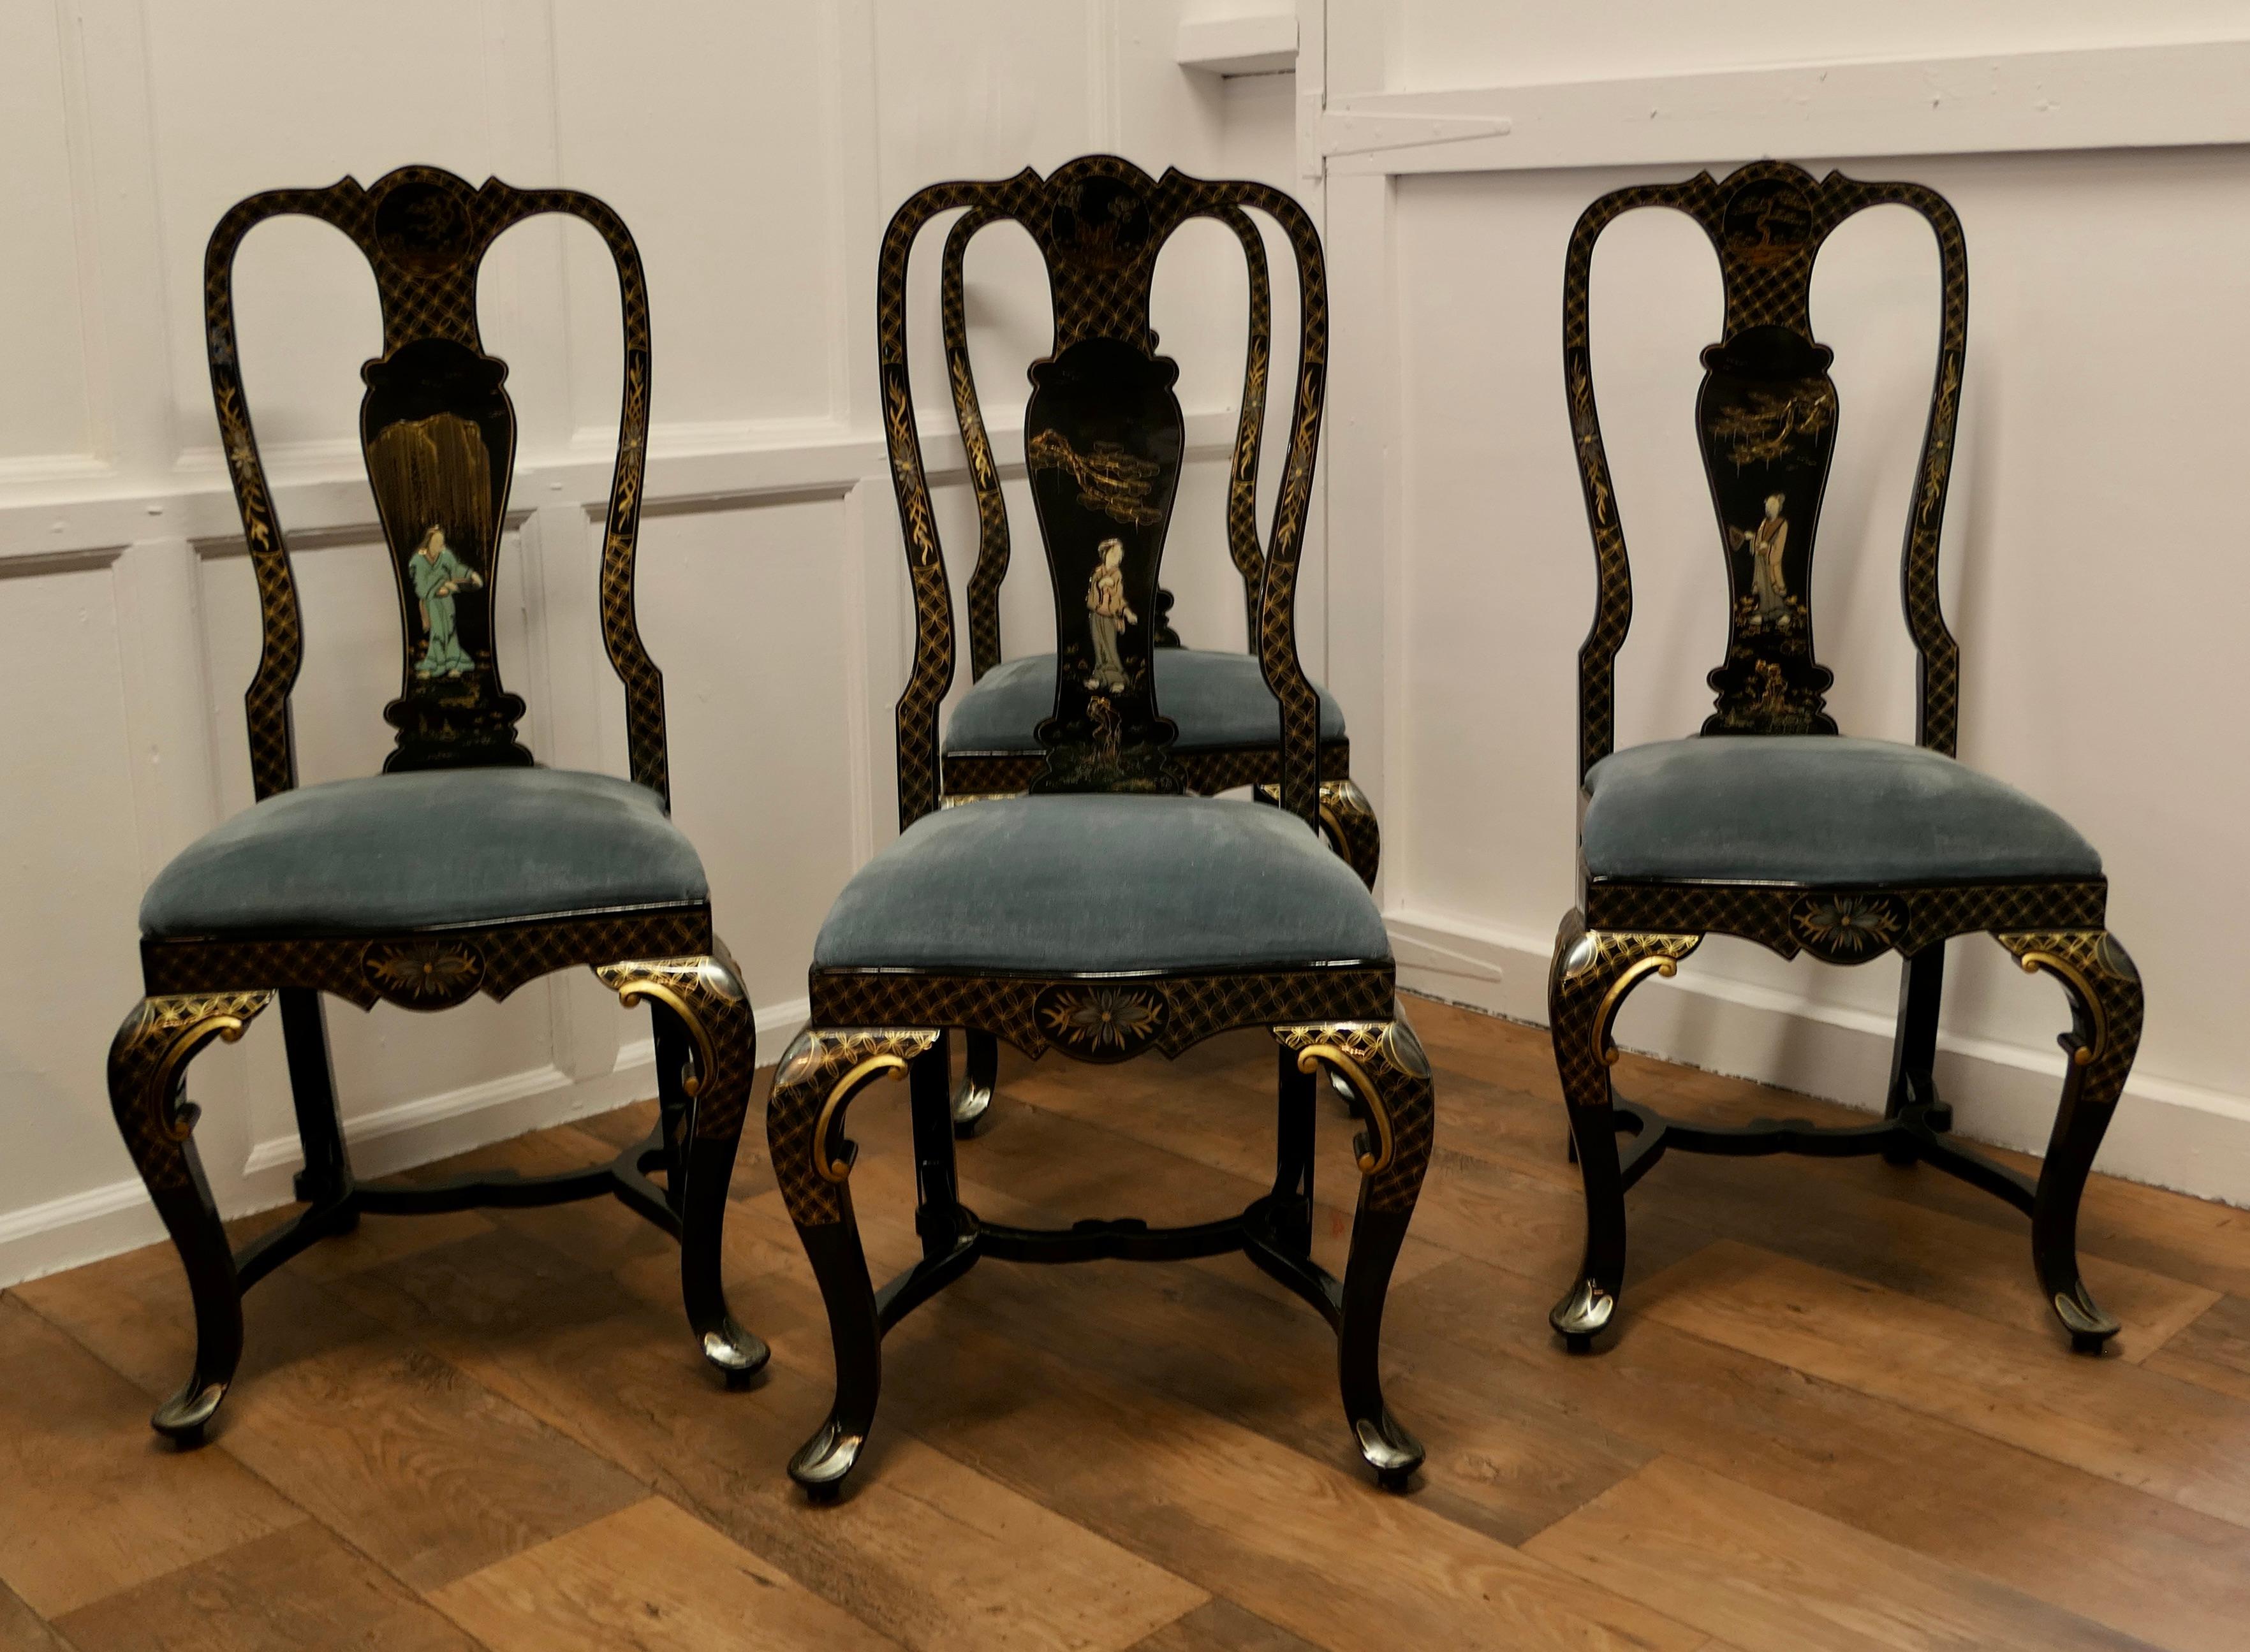 Painted and Lacquered Chinoiserie Dining Chairs

A lovely looking set of Four
The chairs are a classic design they have a solid Back Splat, they are lacquered in the Japanese style with a different character on each and are roomy and comfortable.